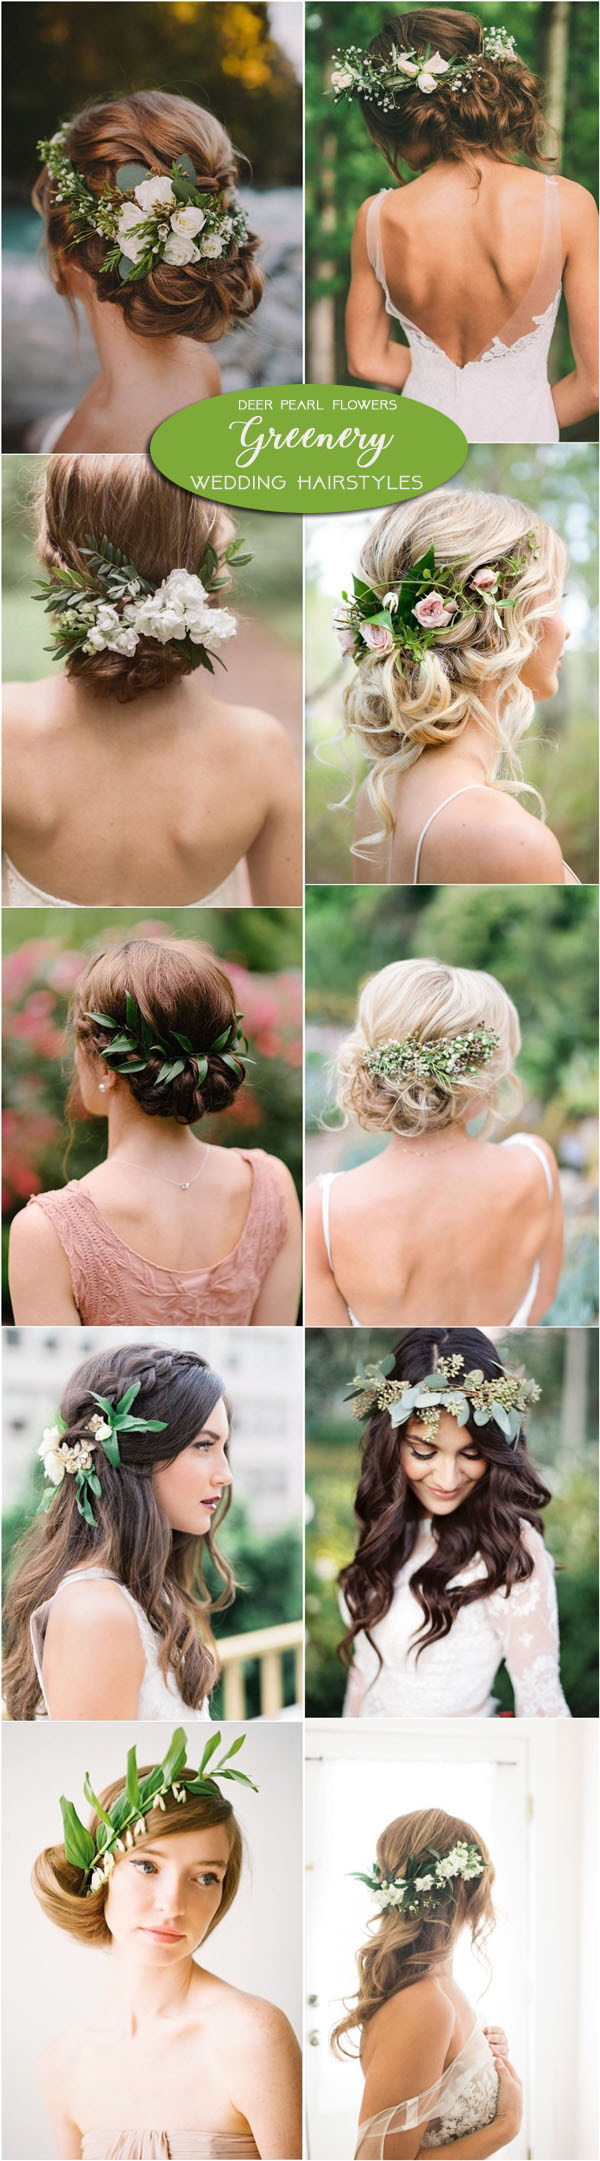 Greenery wedding hairstyles and wedding updos with green flowers